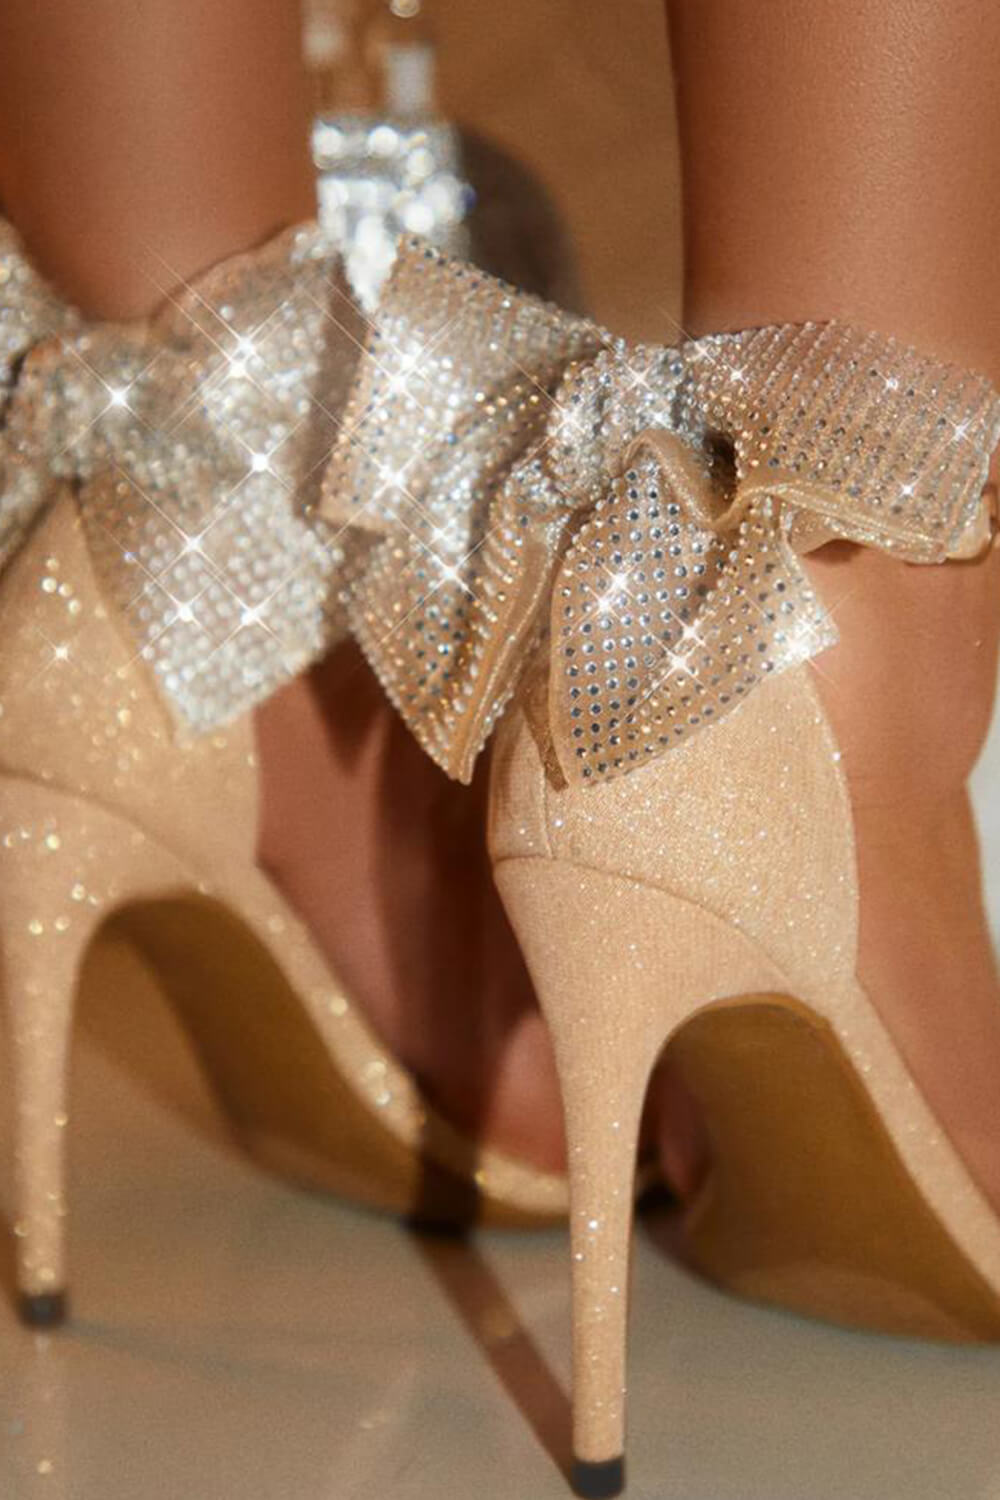 Diamante Bow Embellished Open Square Toe Stiletto Heels - Gold